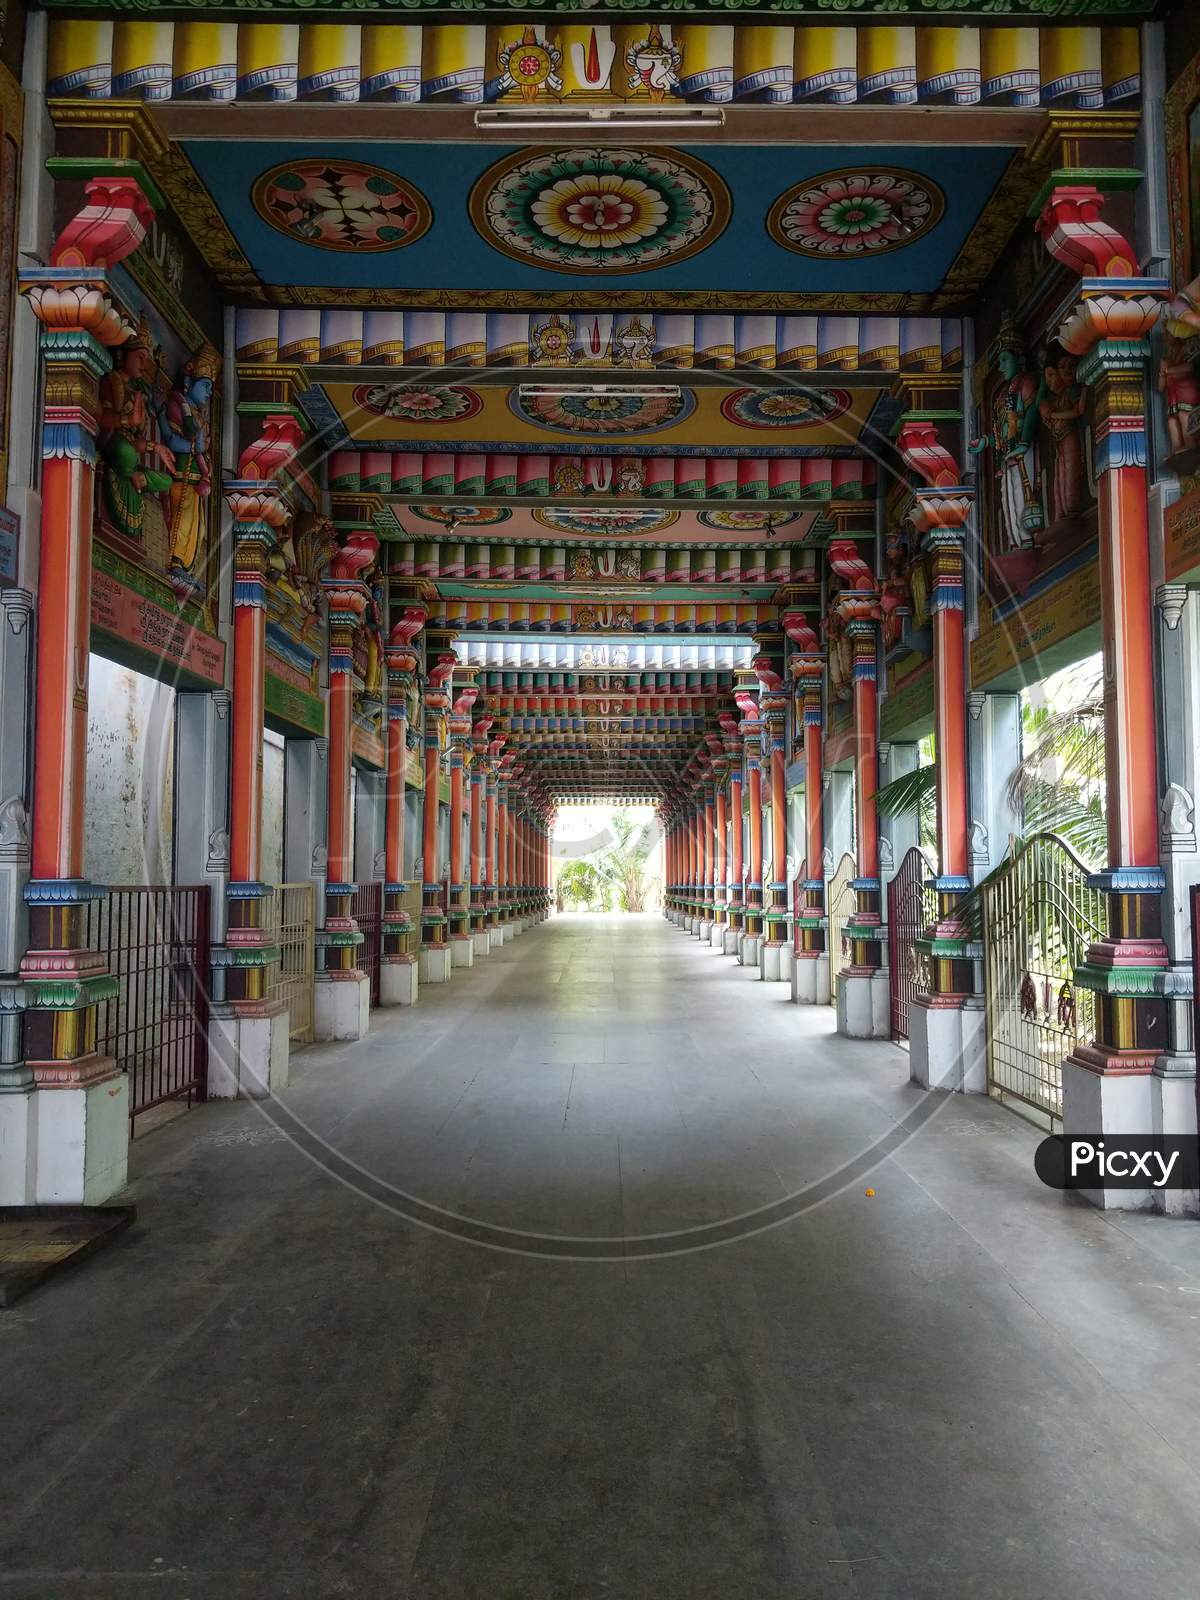 Colorful pillars of the temple